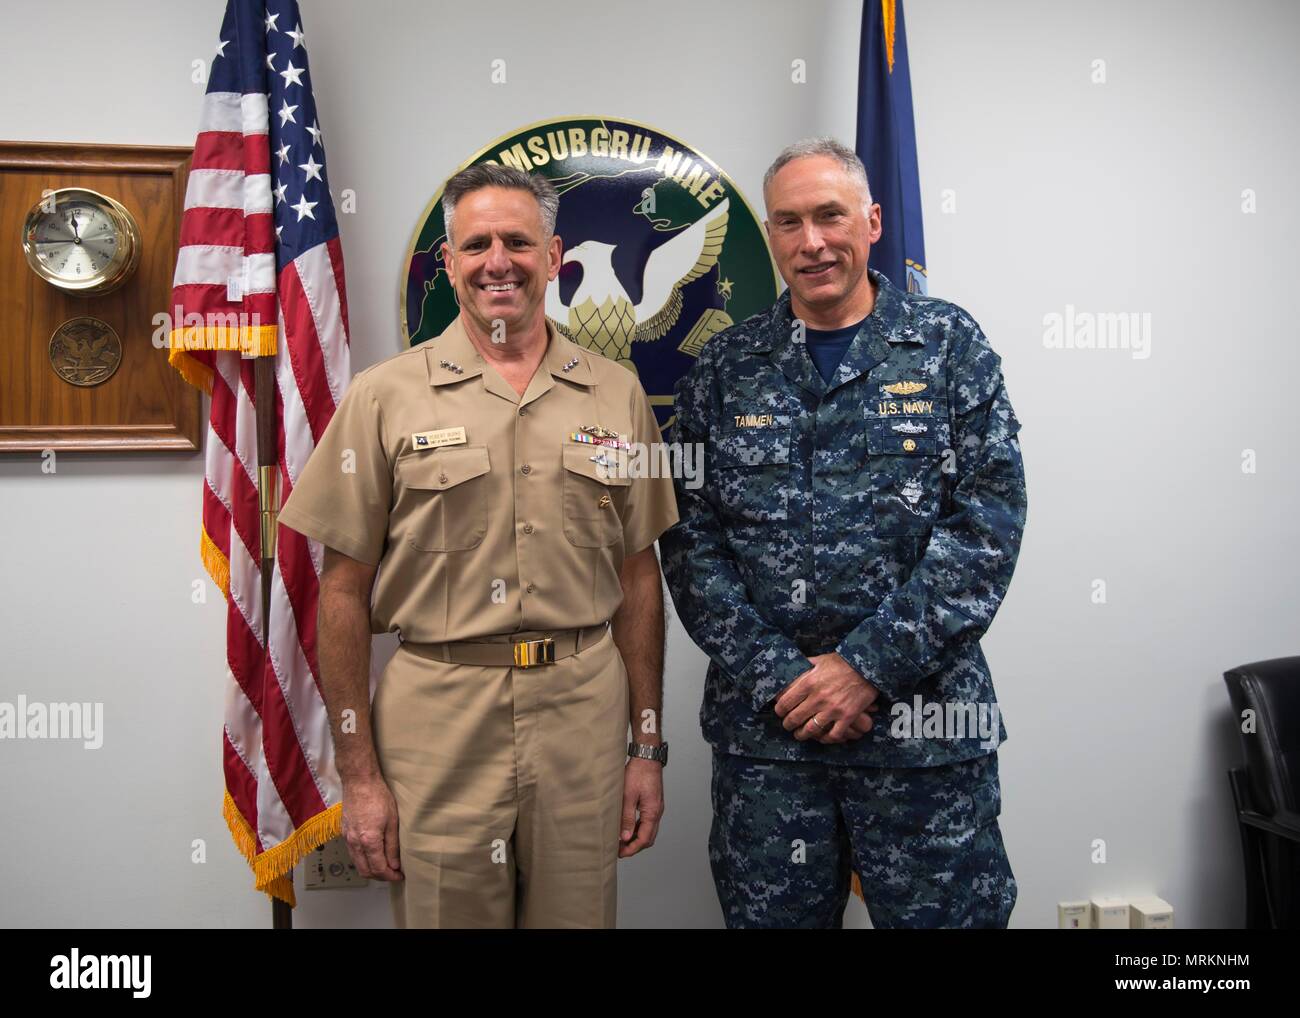 BANGOR, Wash. (June 22, 2017) Chief of Naval Personnel Vice Adm. Robert Burke meets with Rear Adm. John Tammen, commander, Submarine Group 9, while visiting Naval Base Kitsap (NBK) Bangor. During his visit, he conducted four separate all hands calls at NBK Bangor and NBK Bremerton to answer Sailor’s questions. (U.S. Navy photo by Mass Communication Specialist 1st Class Amanda R. Gray/Released) Stock Photo